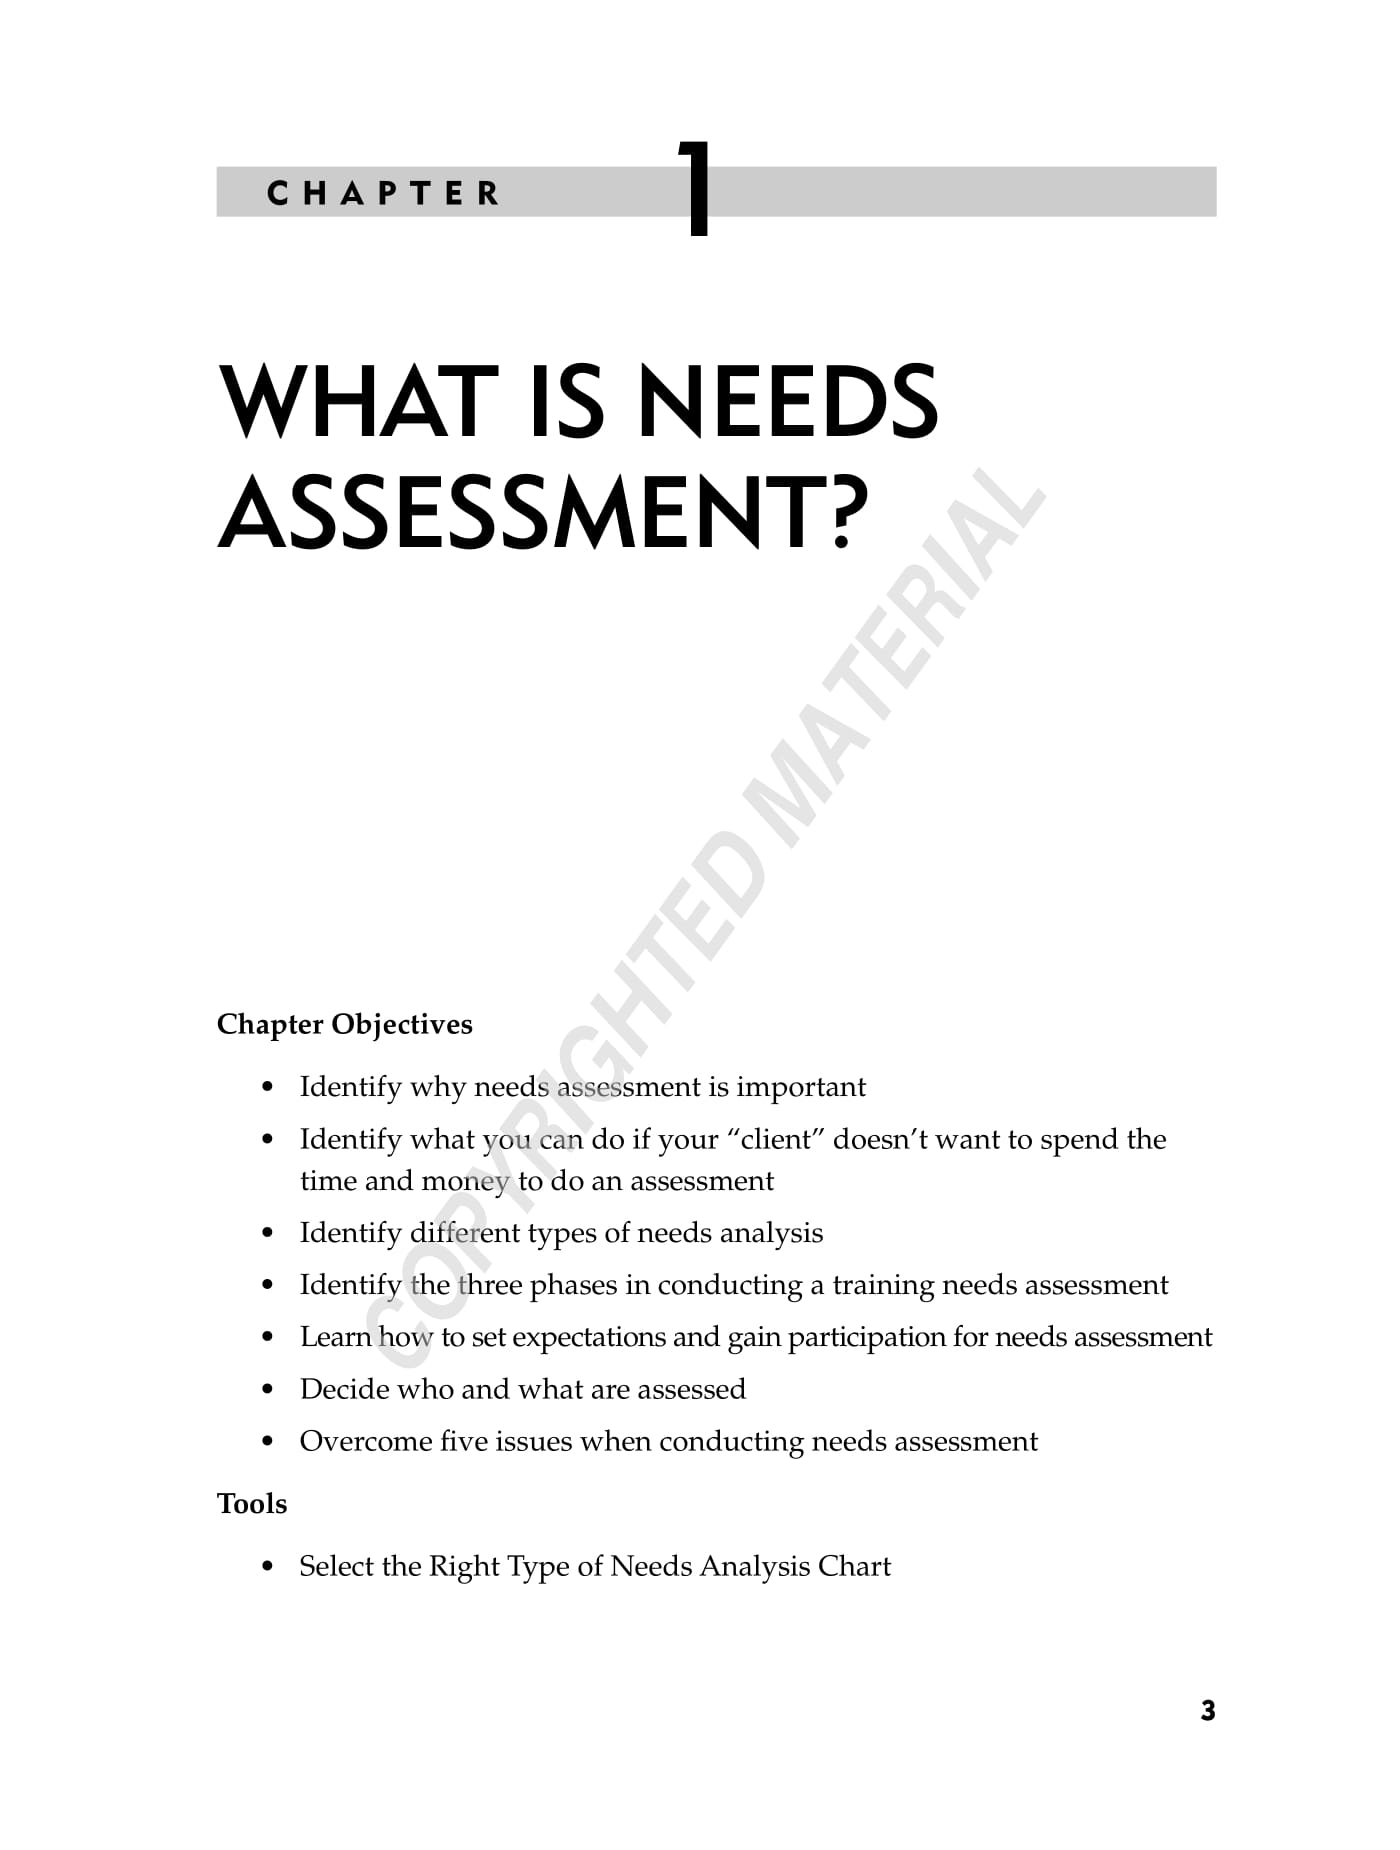 personal statement meets needs for assessment meaning